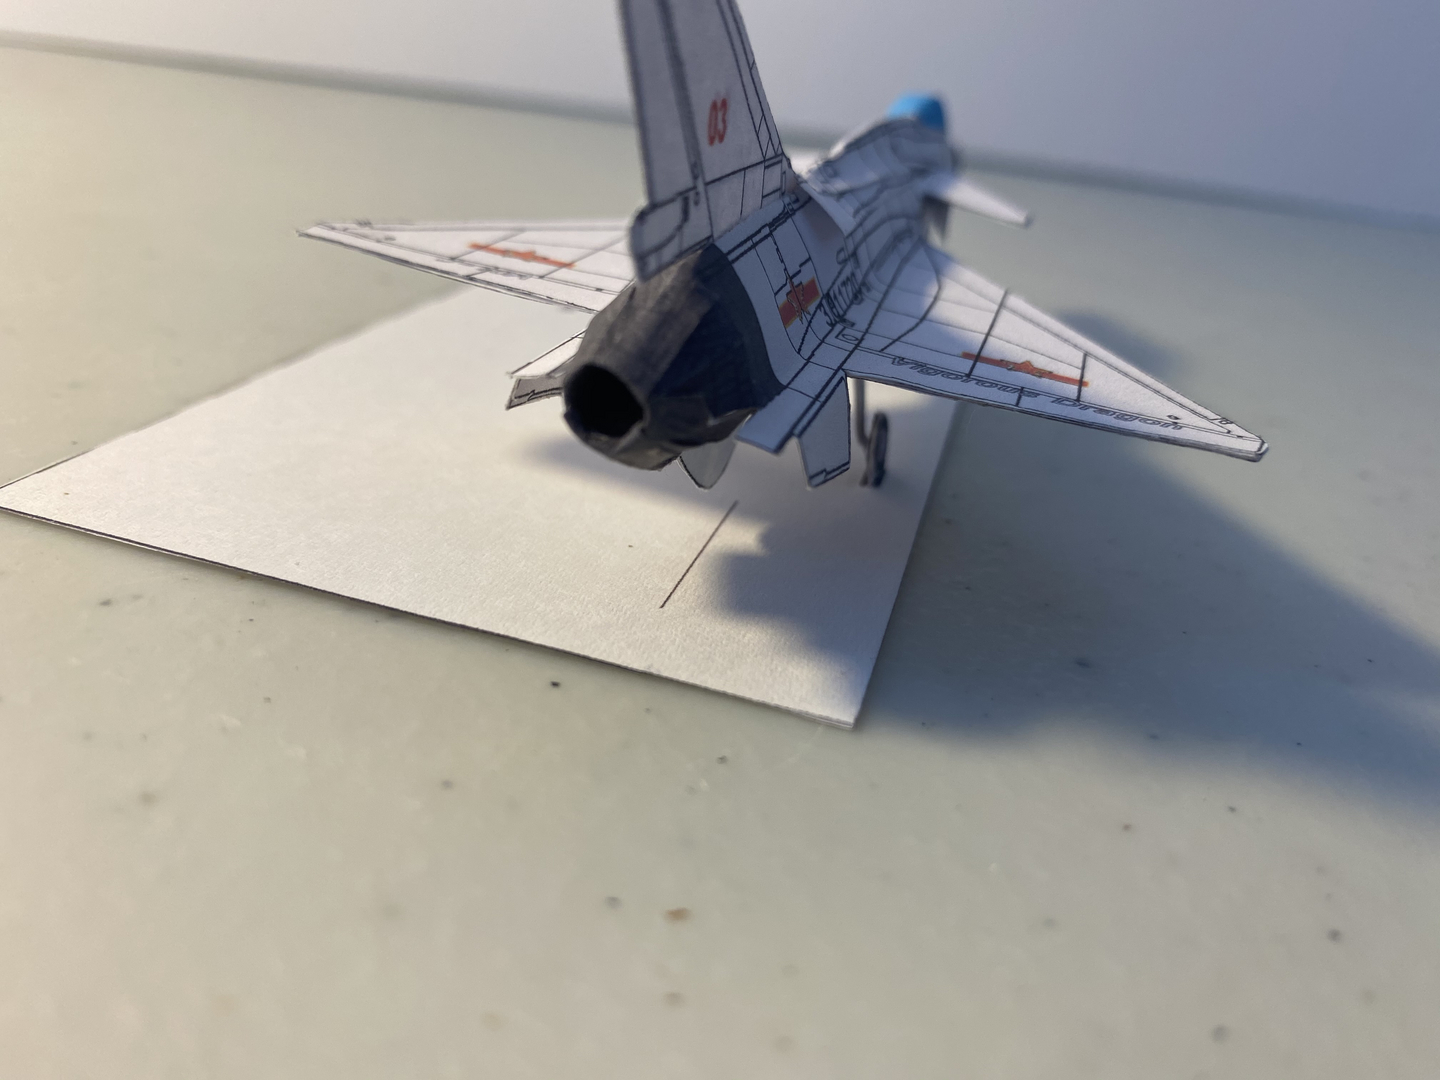 4D paper airplane - Model Kit, Paper Airplane Template